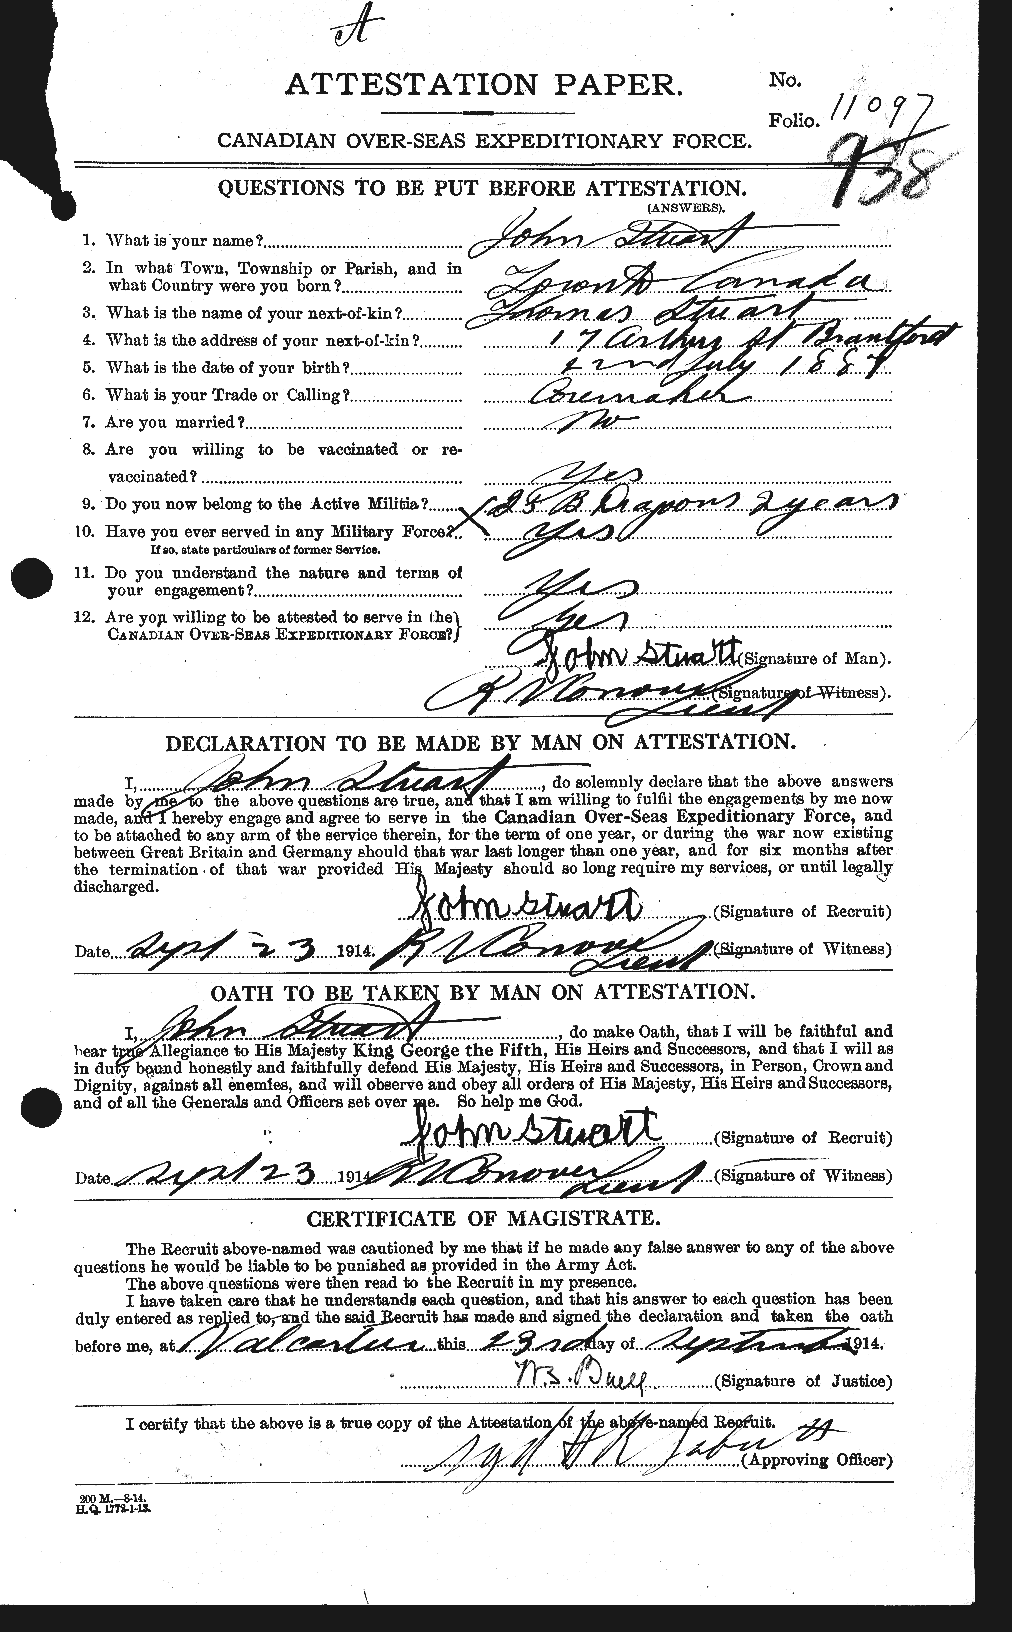 Personnel Records of the First World War - CEF 623138a